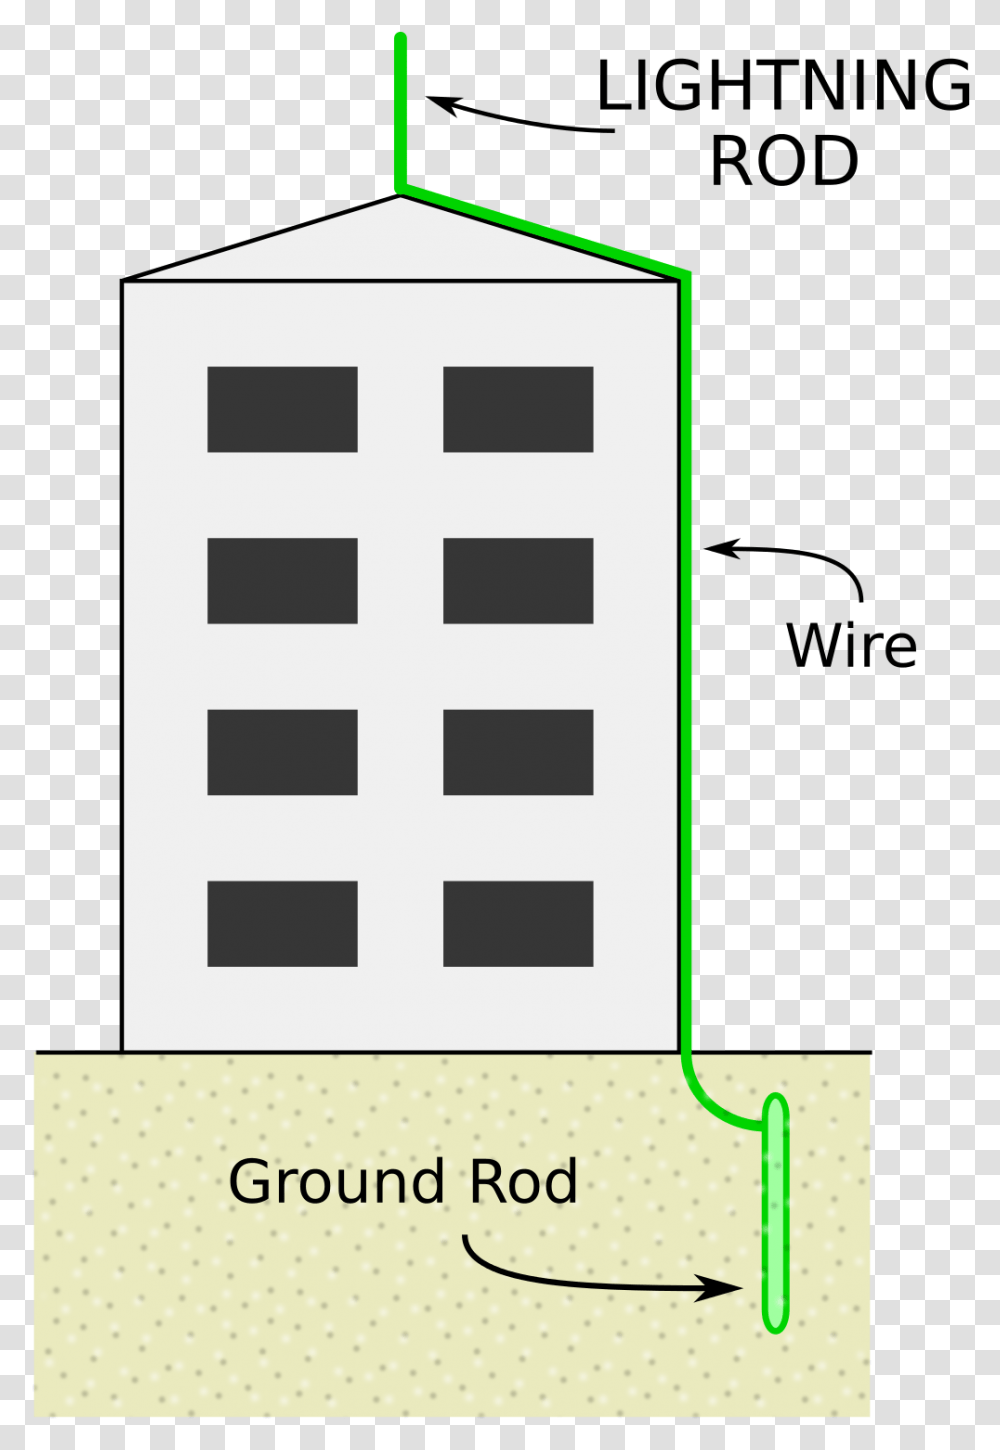 Lightning Rod Wikipedia Do Lightning Rods Work, Electrical Device, Electrical Outlet, Text Transparent Png